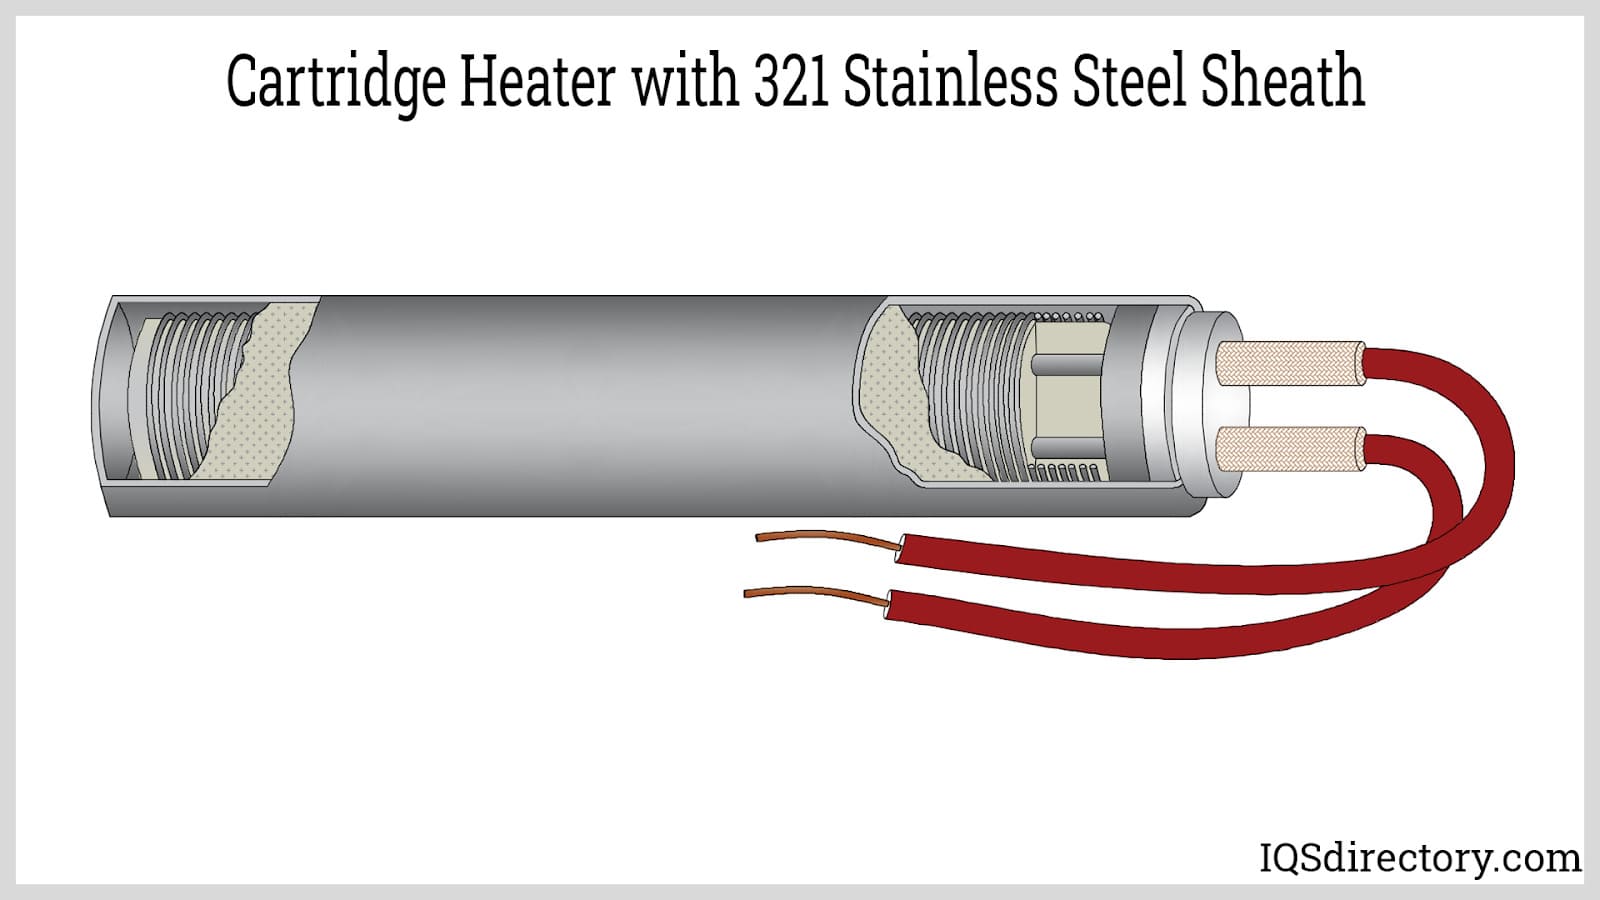 Cartridge Heater with 321 Stainless Steel Sheath